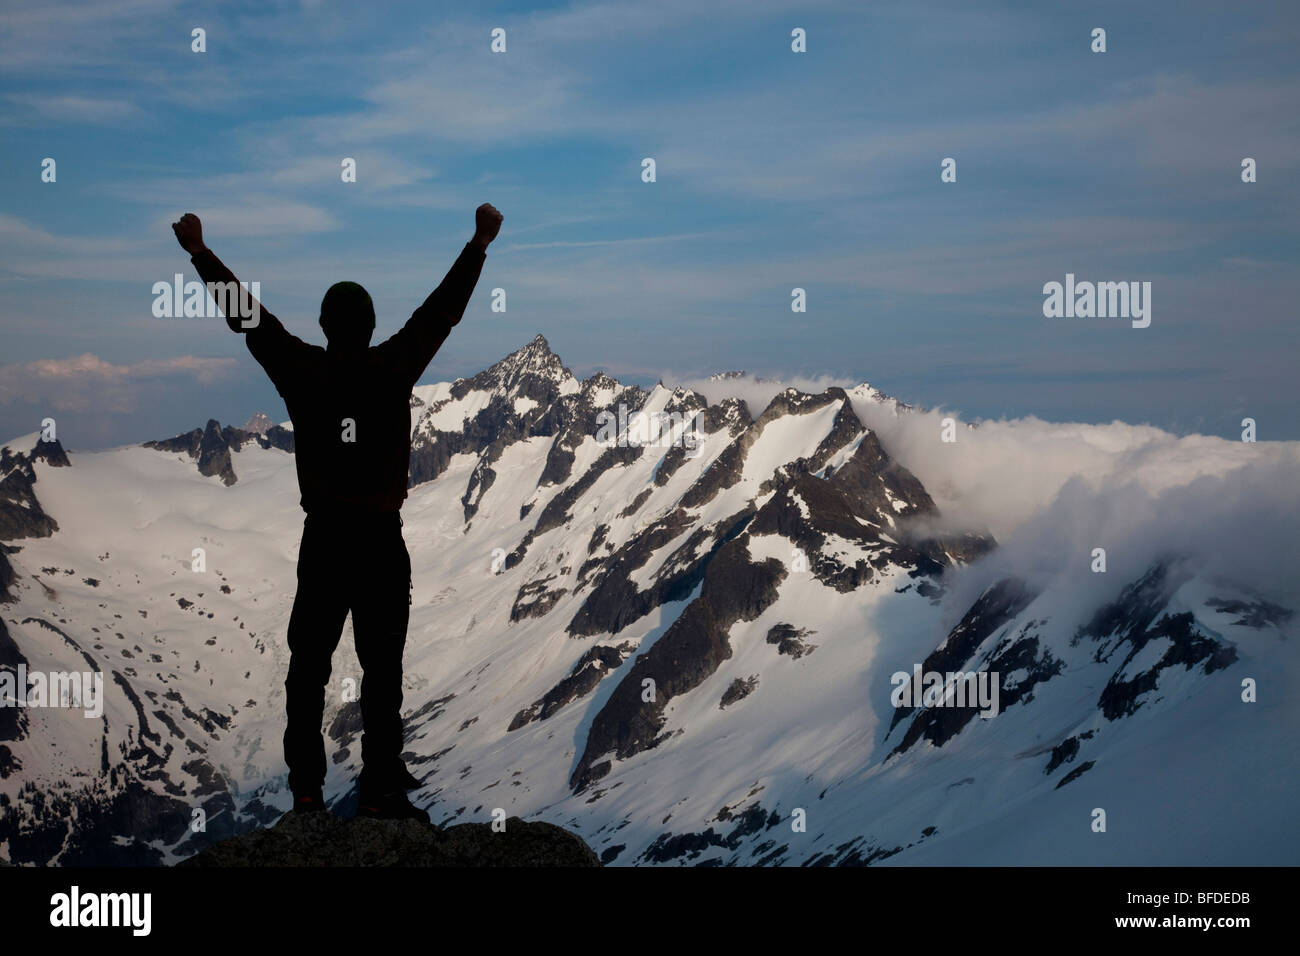 Silhouetted against a dramatic backdrop, a young climber raises his arms while enjoying the mountain view. Stock Photo